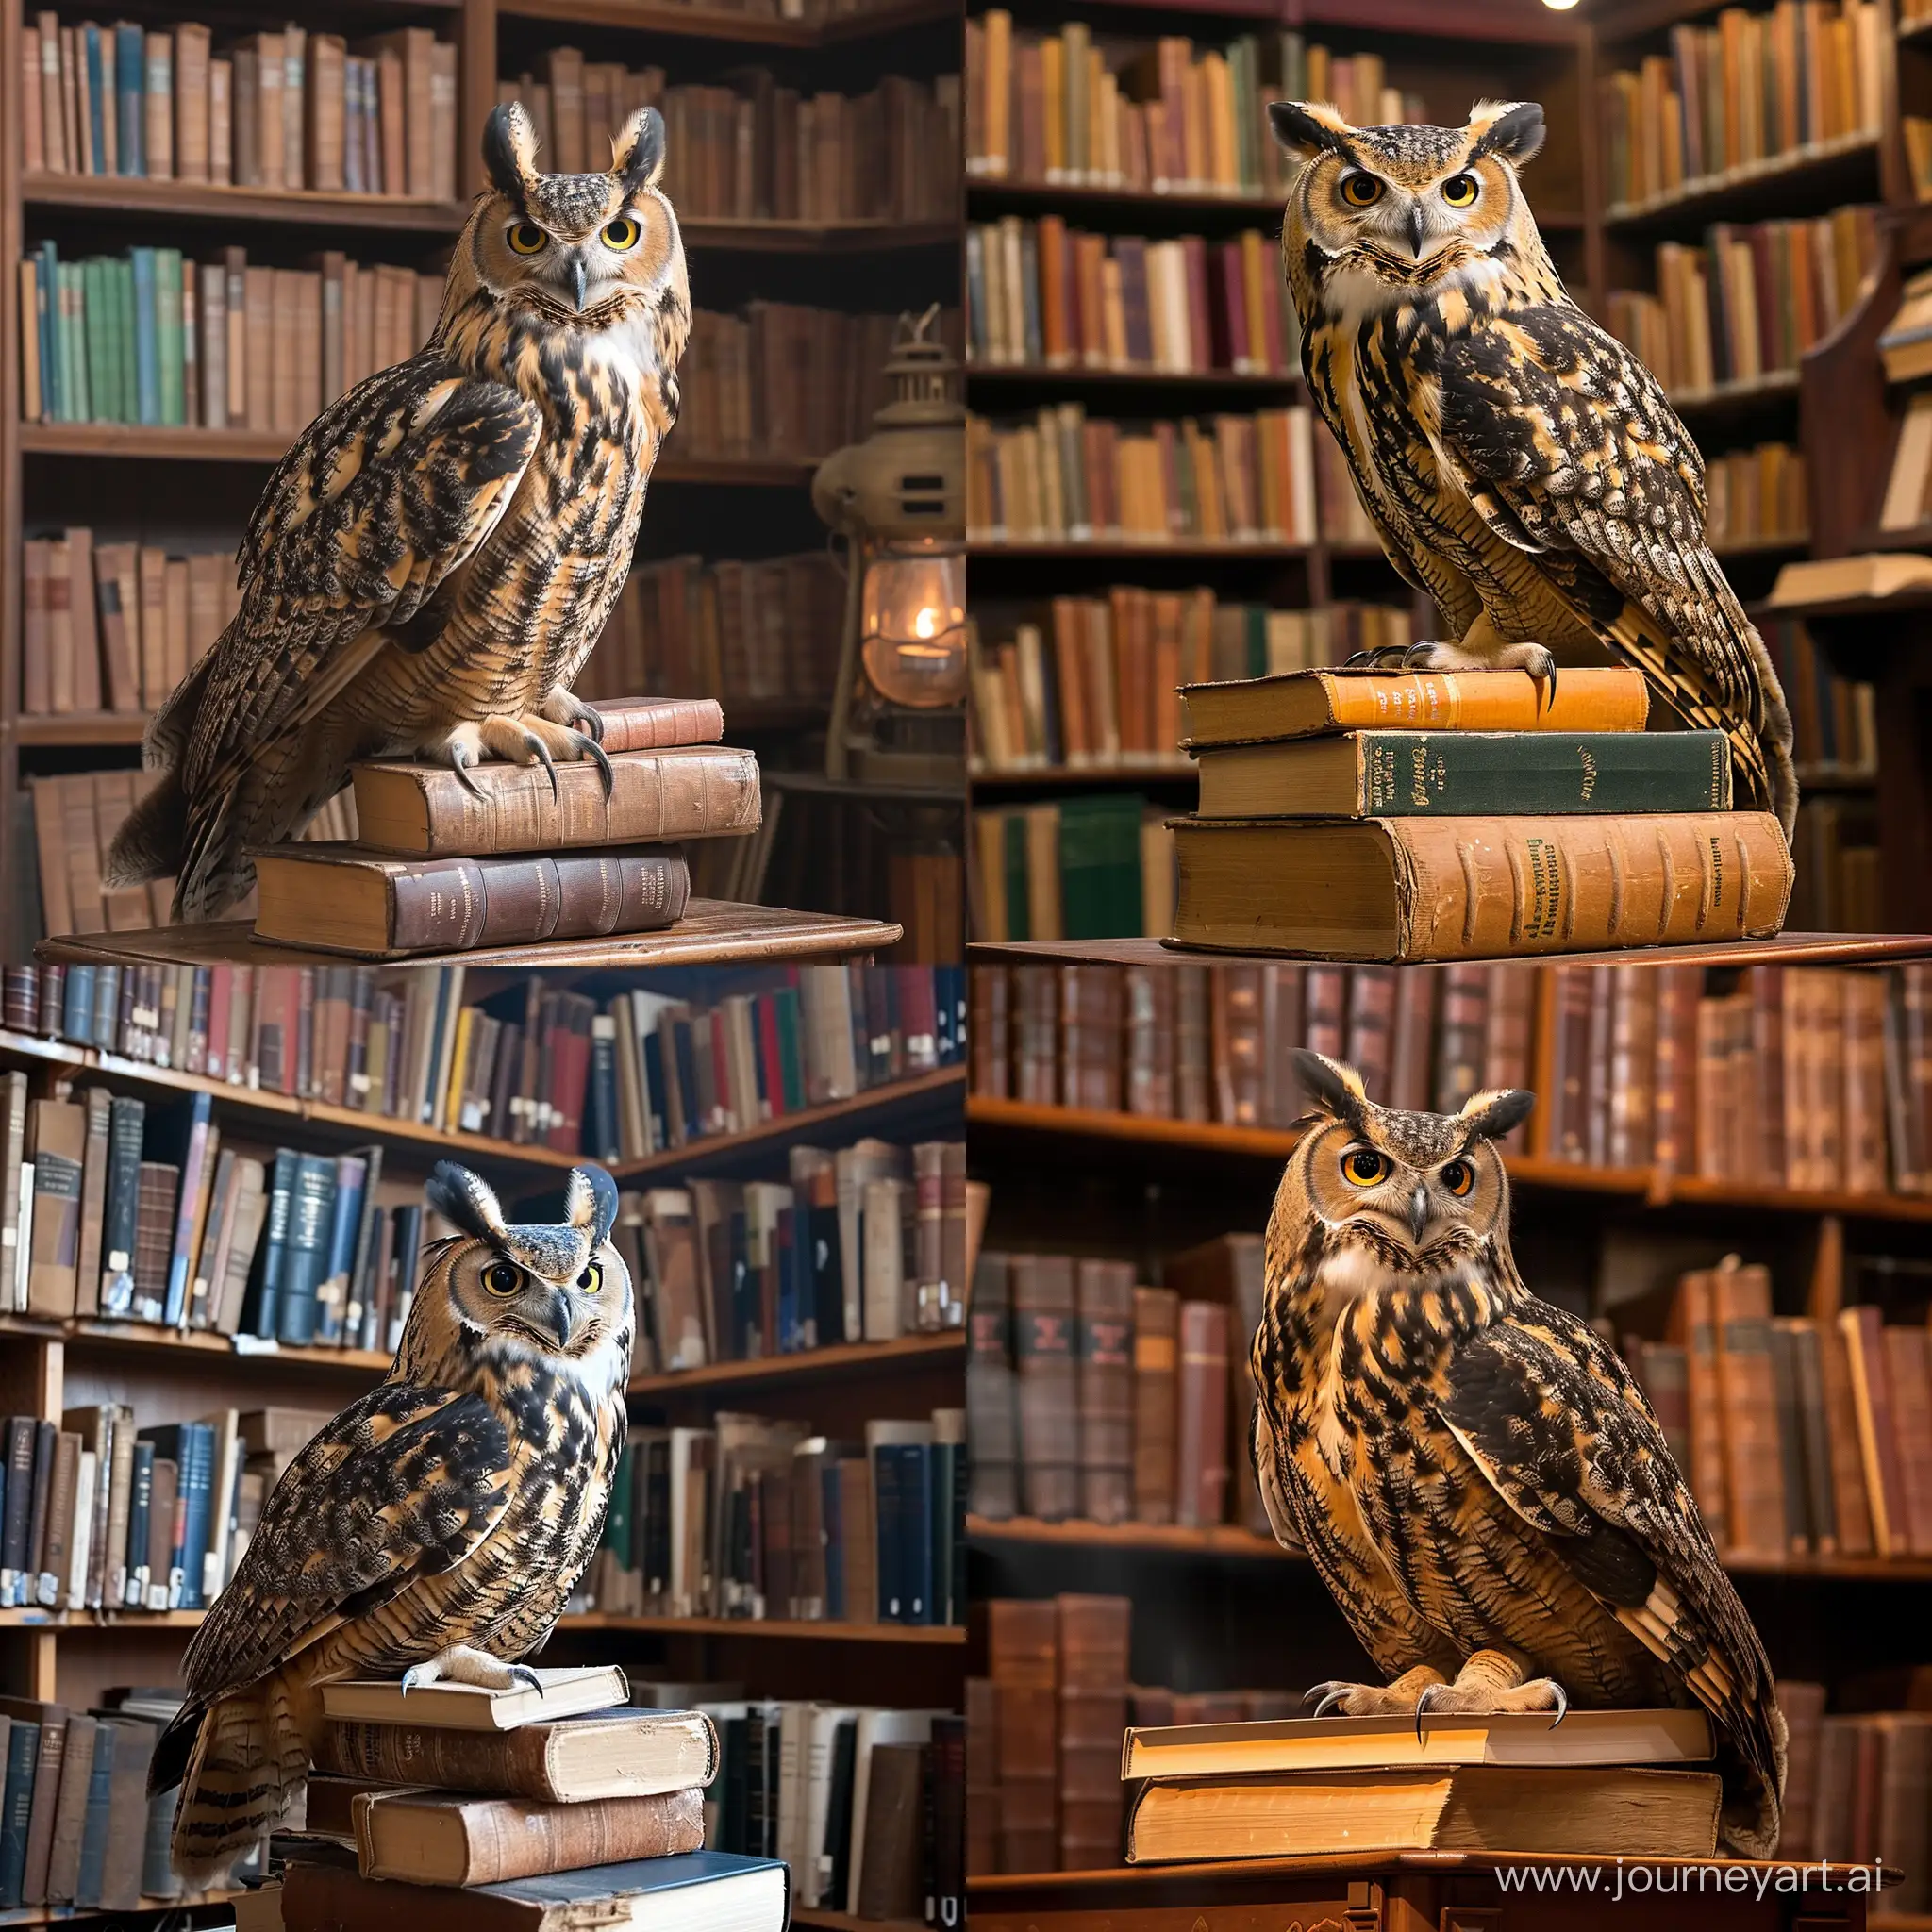 Majestic-Owl-Perched-on-a-Tower-of-Knowledge-in-the-Library